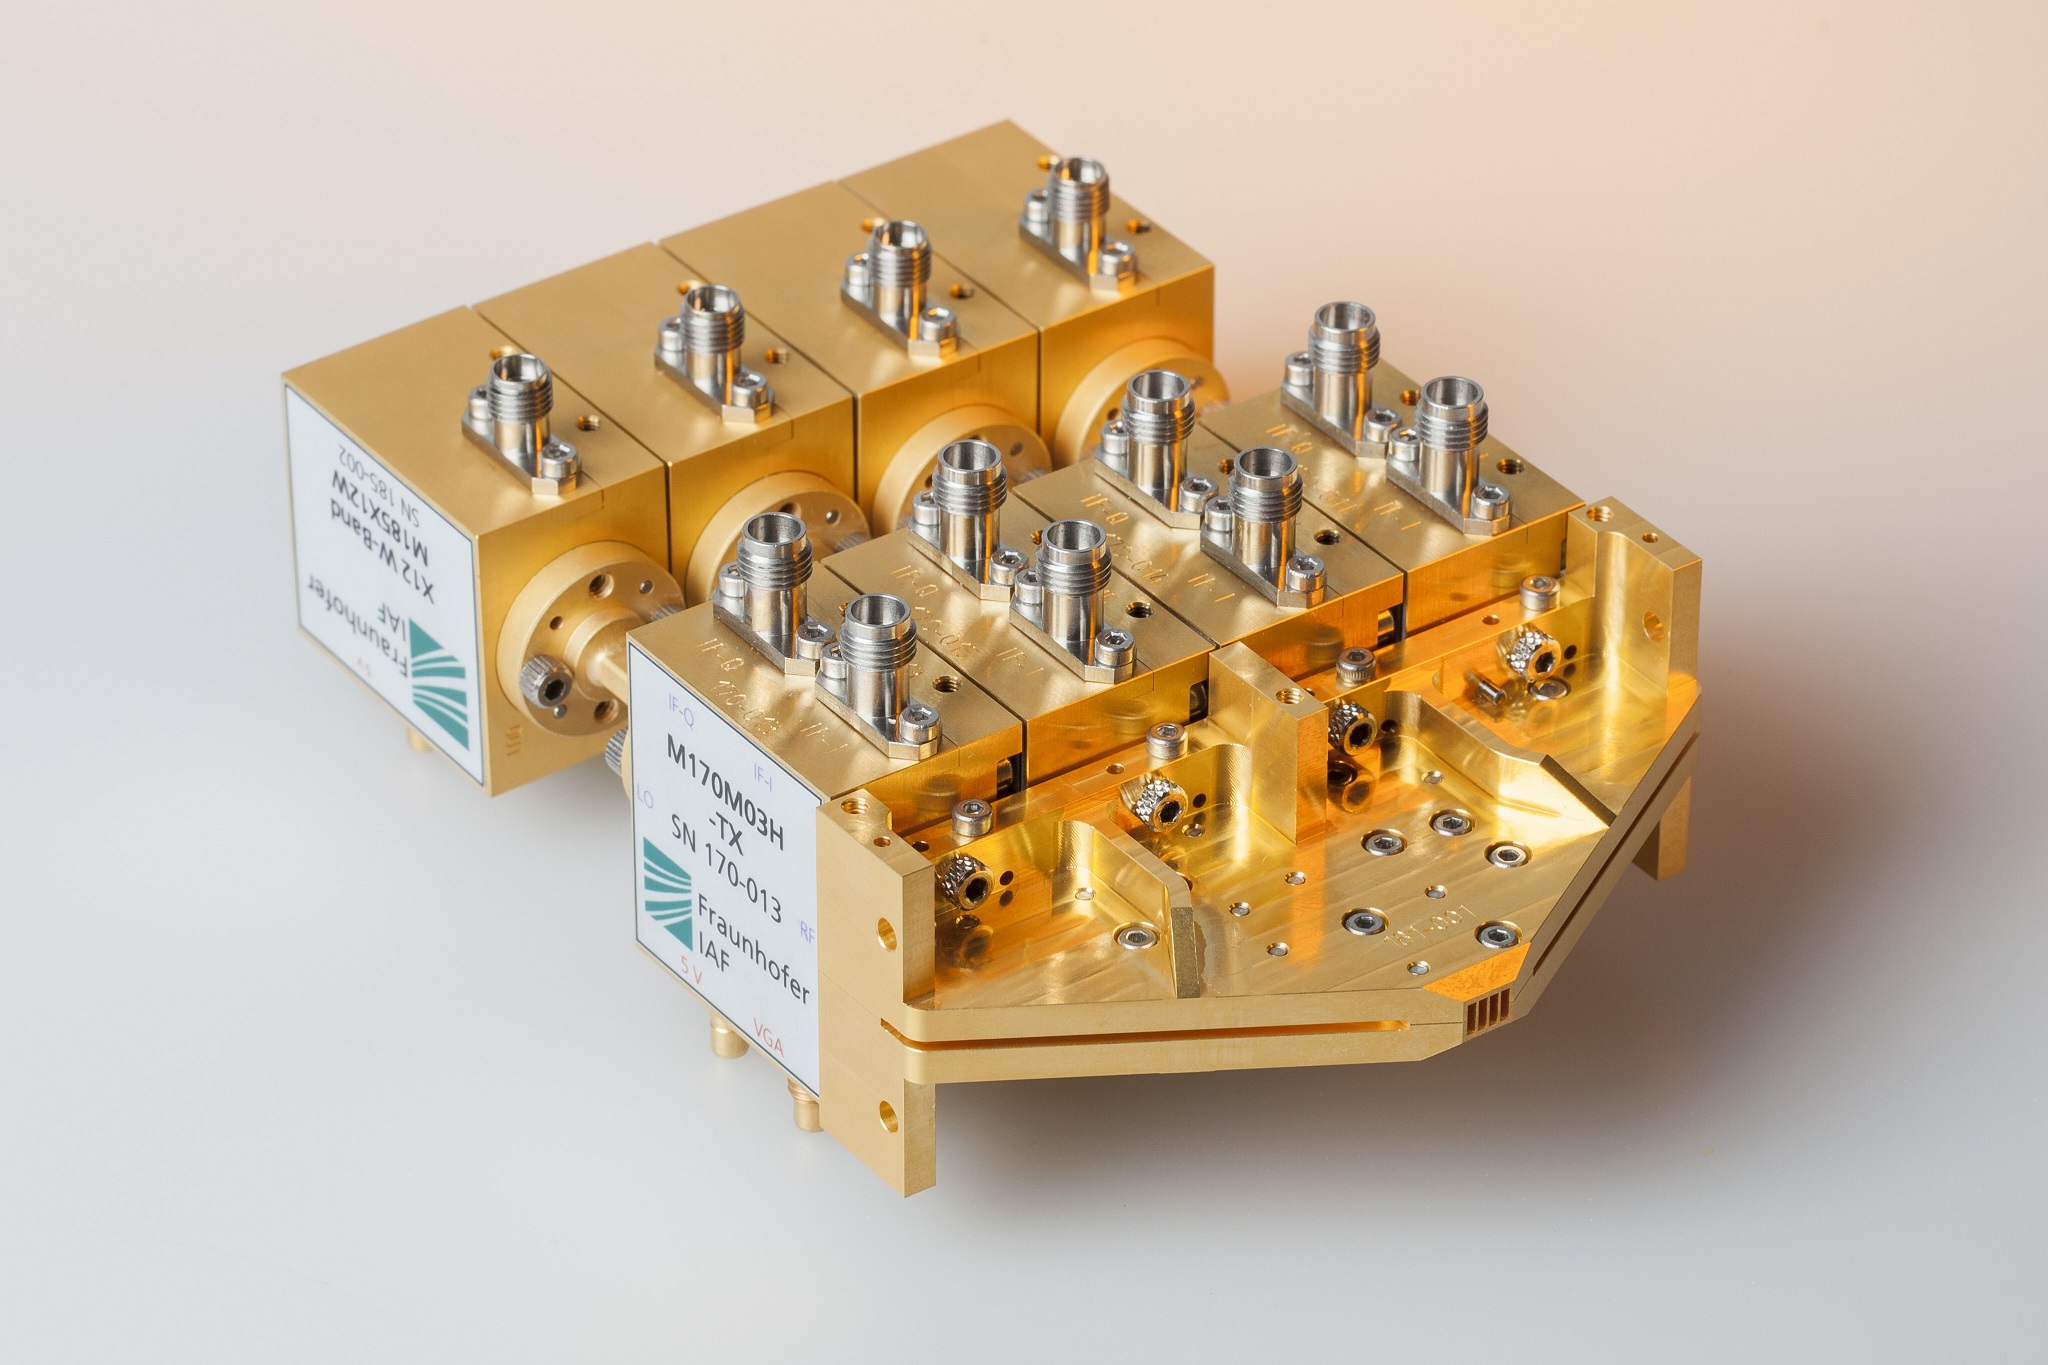 Radio module for use in 5G wireless THz communication. The interdisciplinary project team of TERRANOVA investigates new system architectures for embedding broadband wireless THz connections in optical fiber lines.